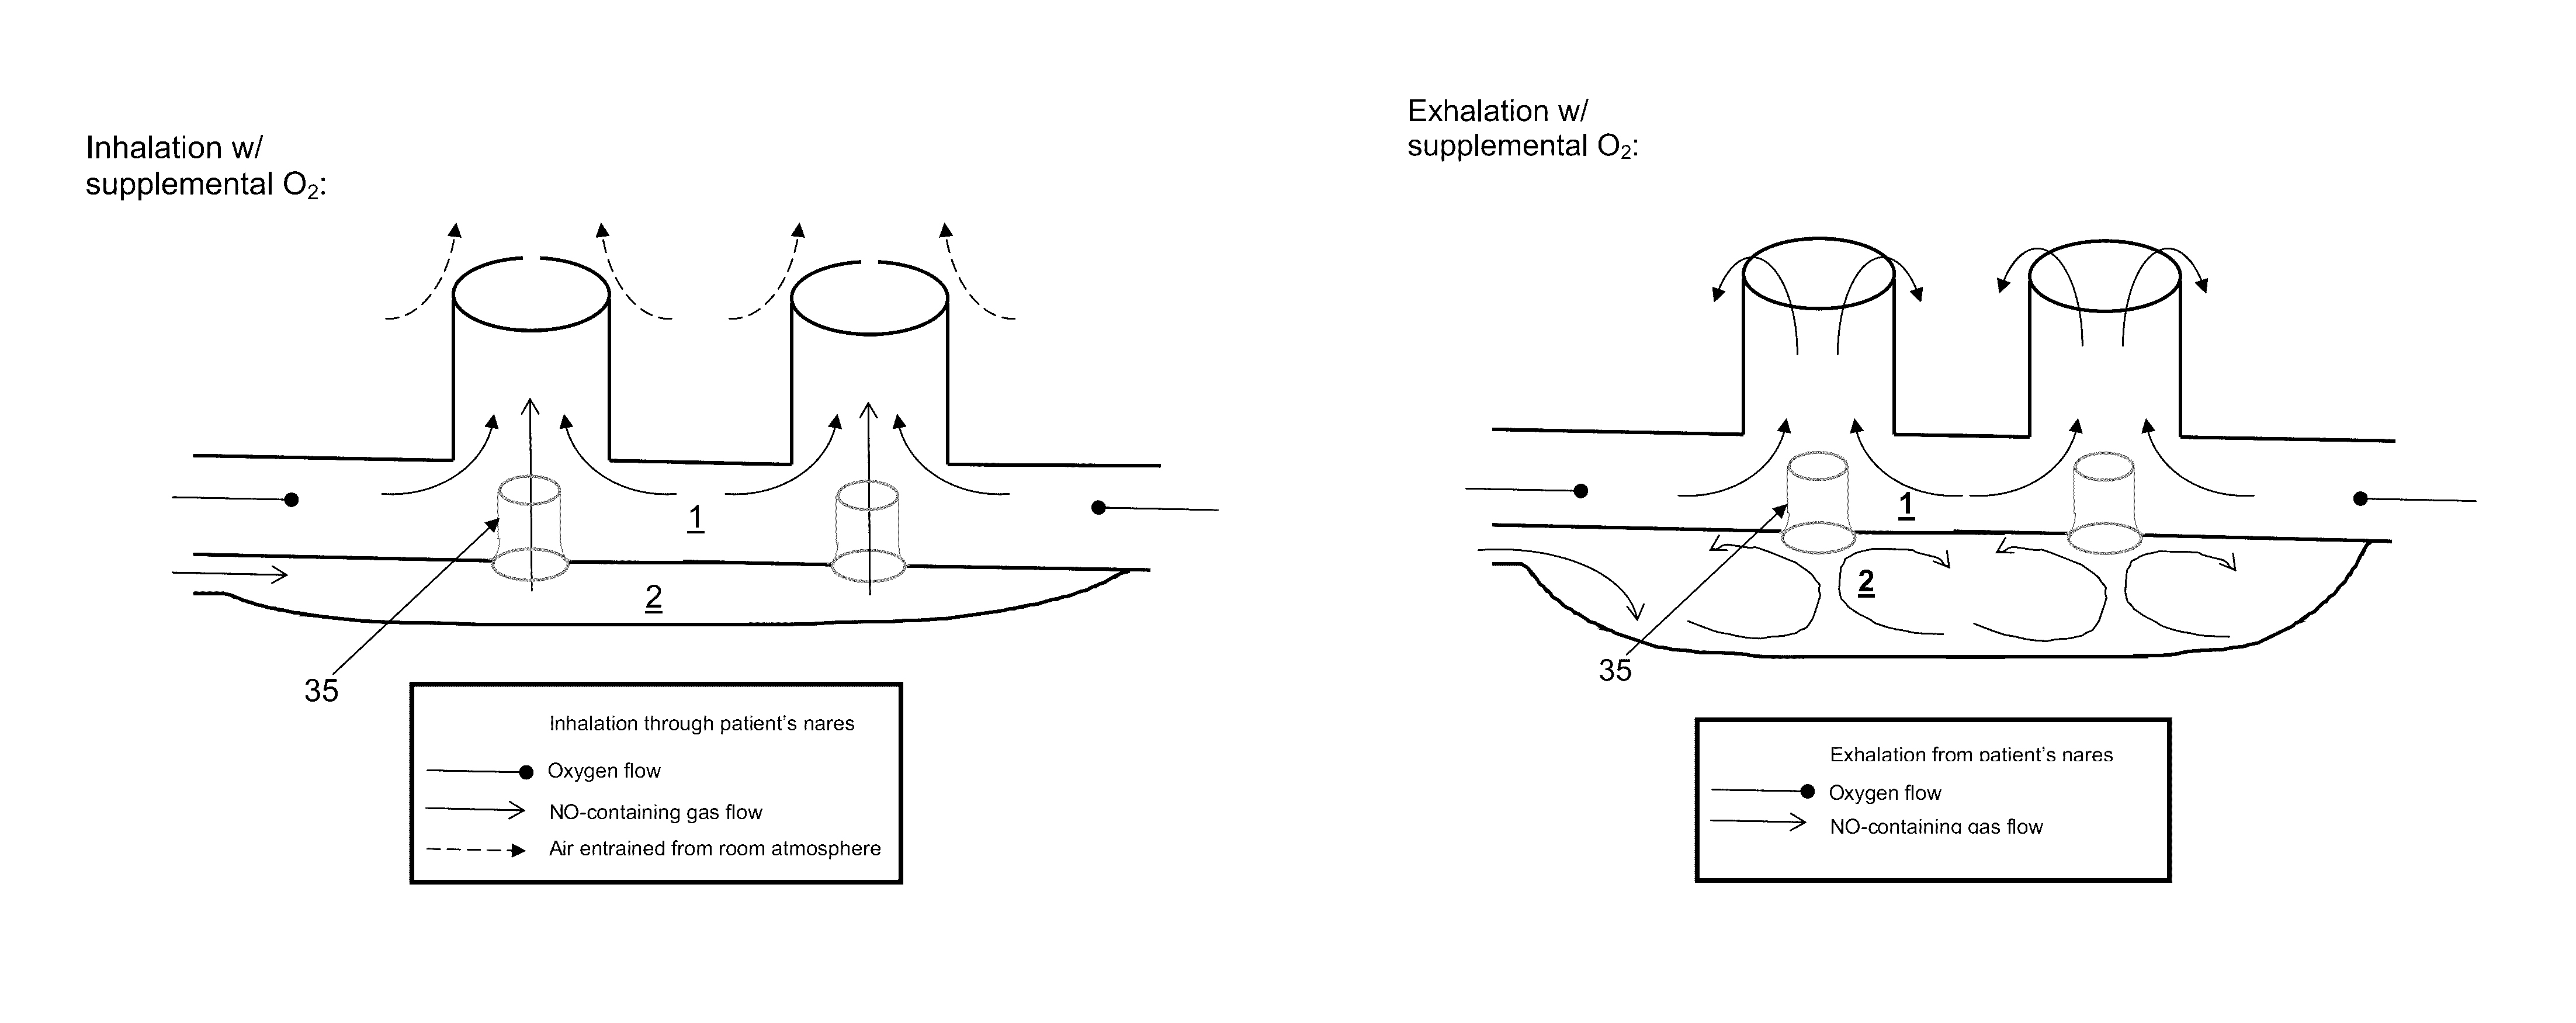 Breathing assistance apparatus for delivery of nitric oxide to a patient by means of a nasal cannula assembly with flow control passage